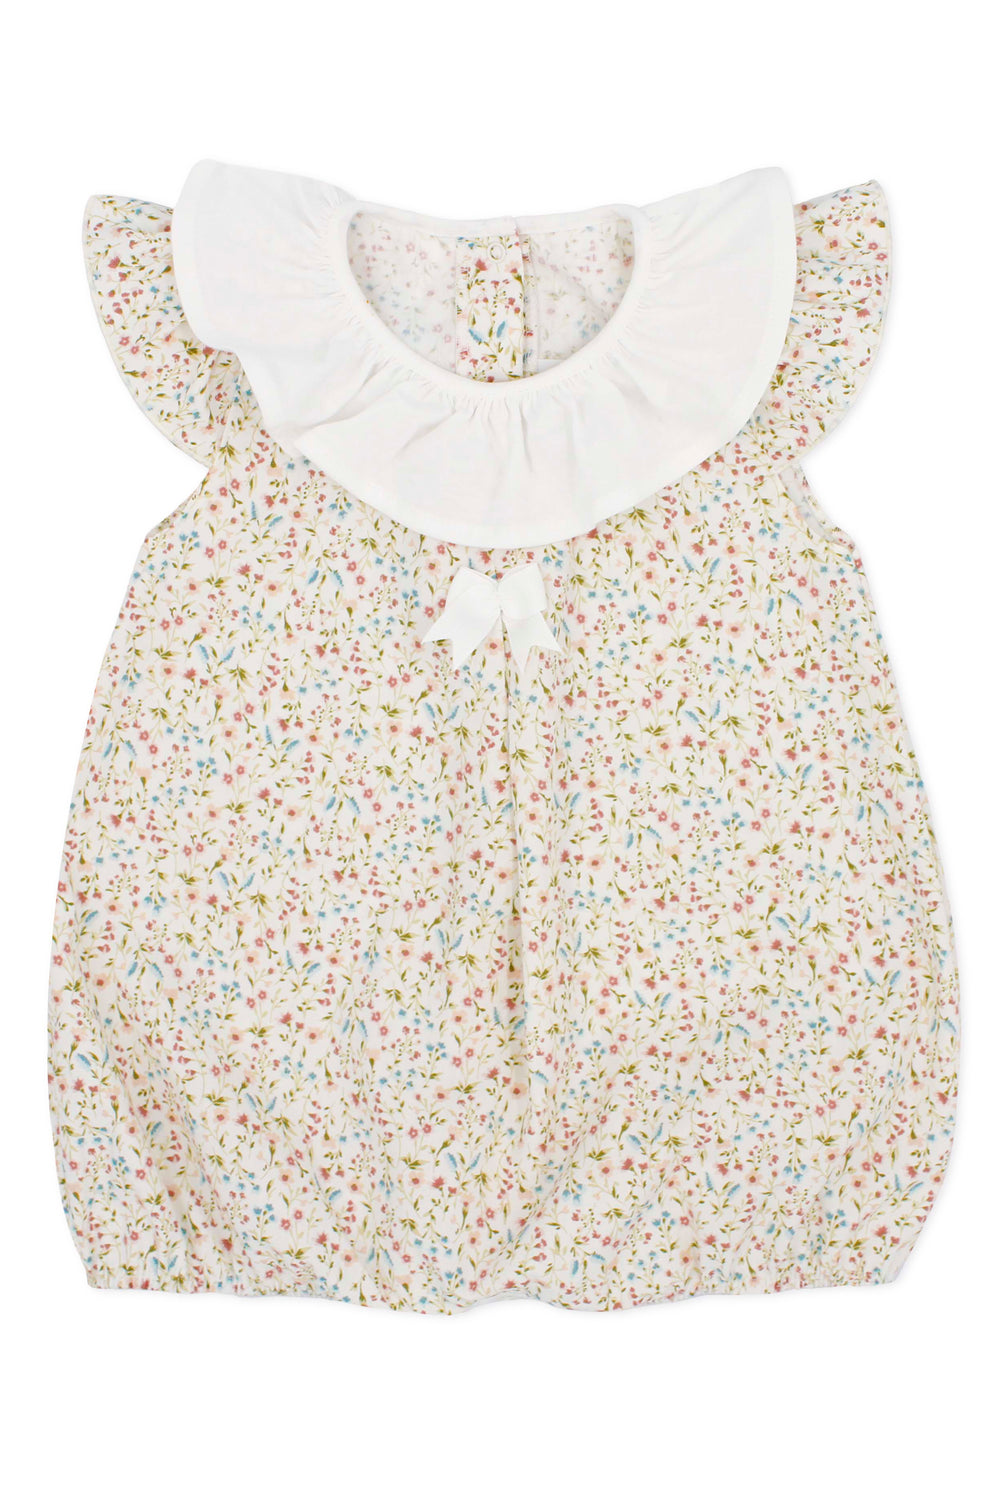 Rapife "Immy" Pastel Floral Romper | Millie and John